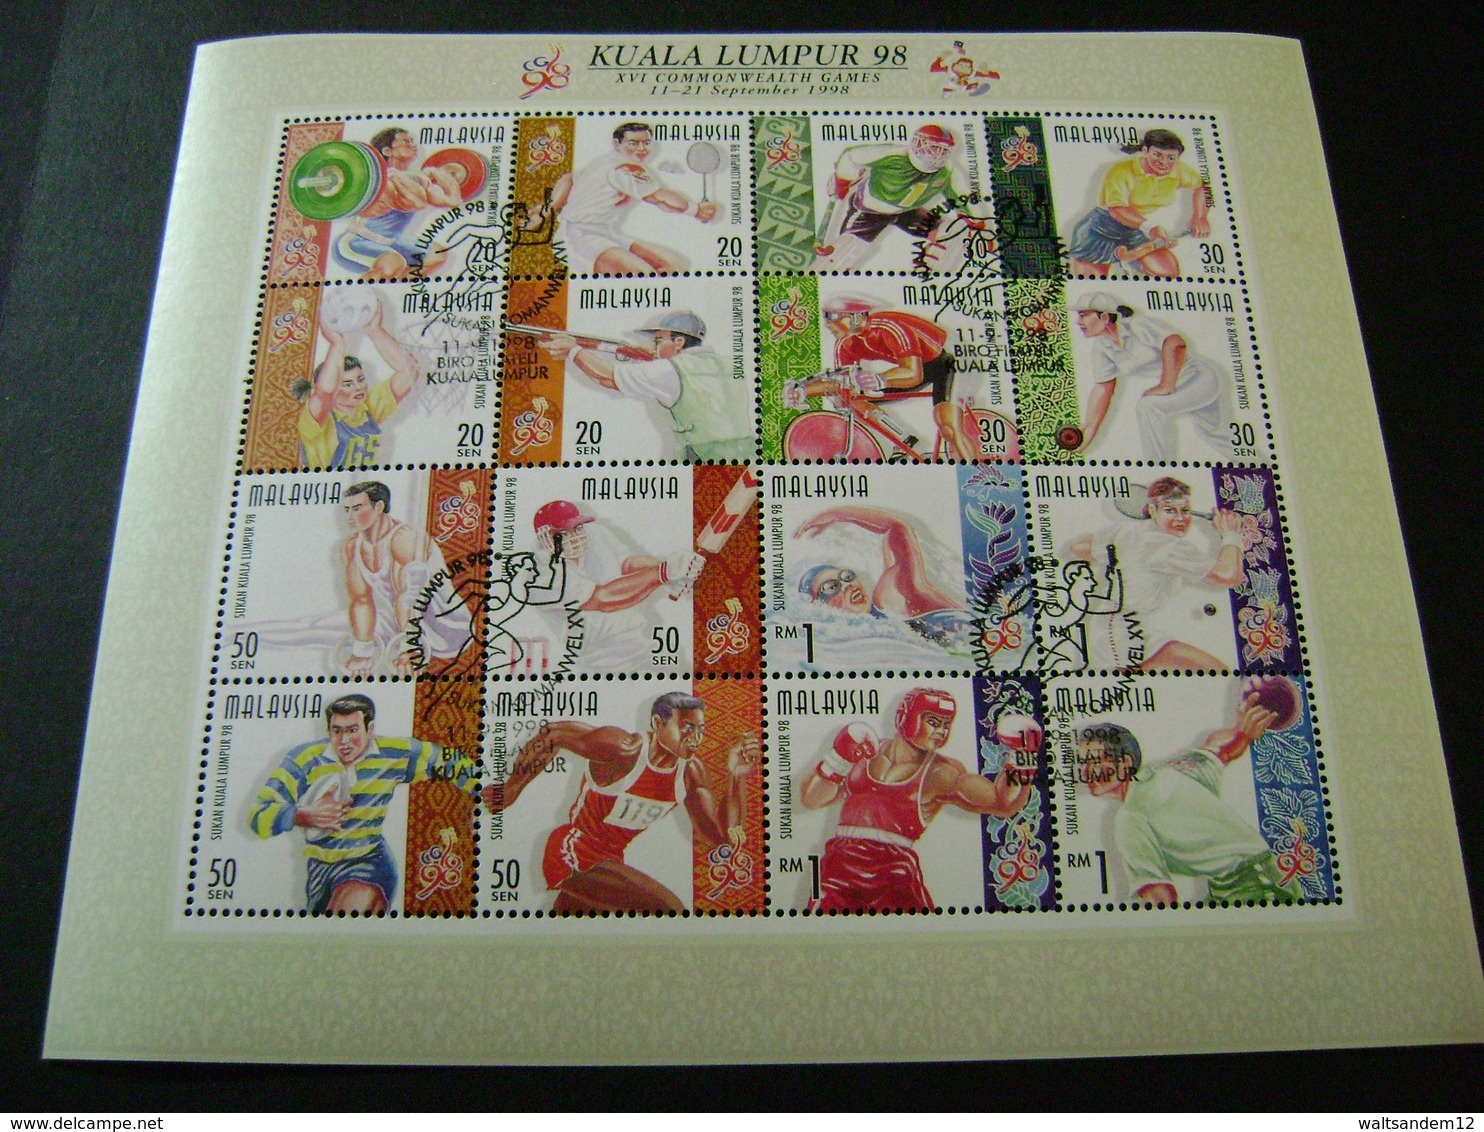 Malaysia 1998 Stamp Issues (SG 674-687, Ms688, 689-713, Ms714) 3 Images - Used - Malaysia (1964-...)